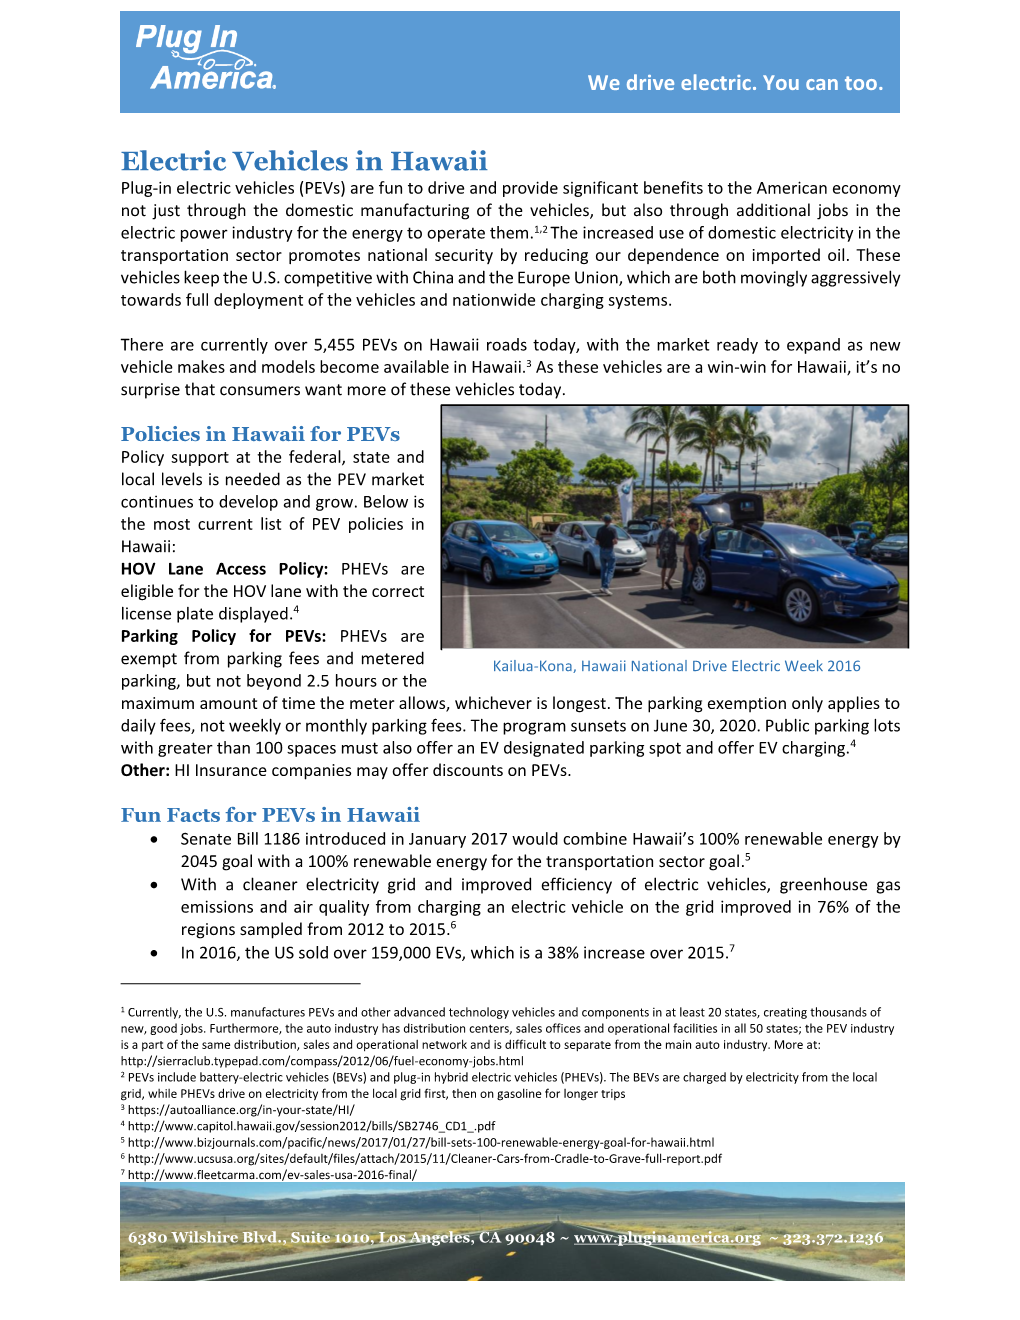 Electric Vehicles in Hawaii